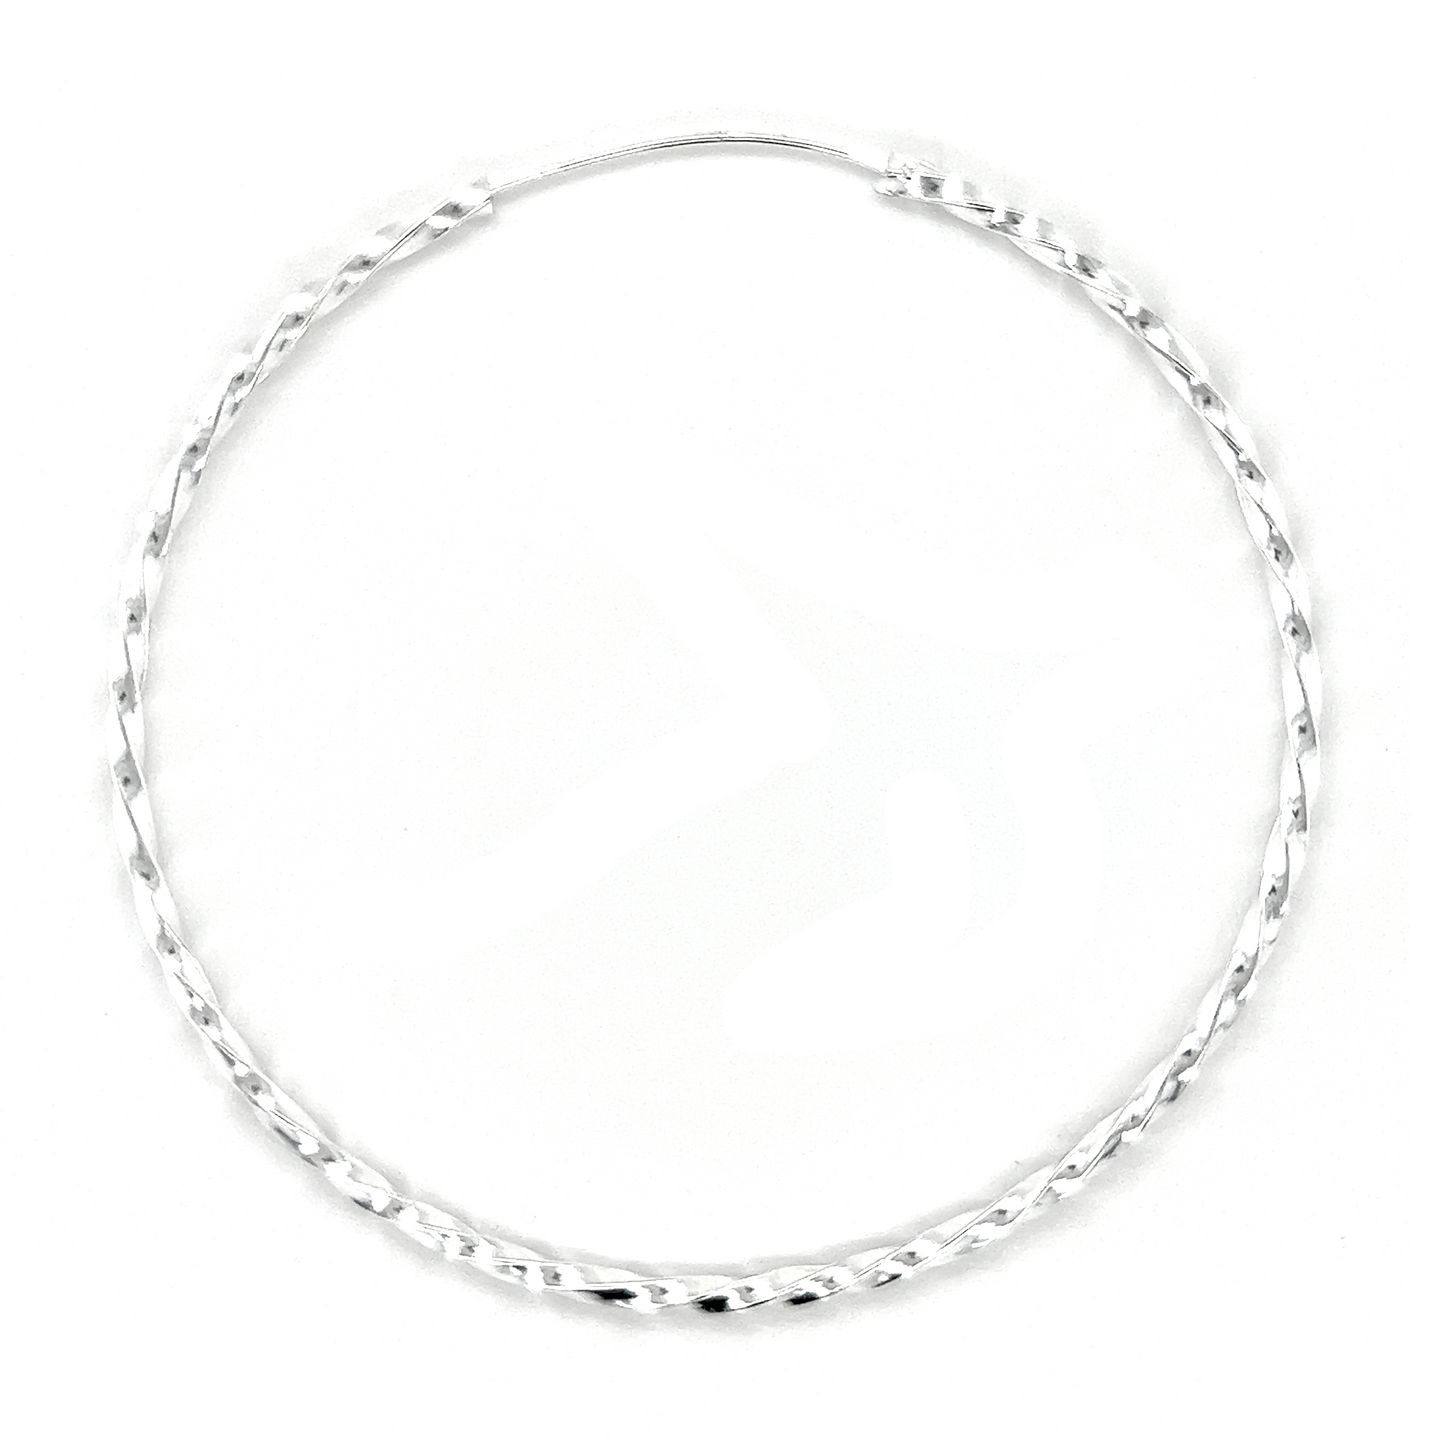 70mm Twisted Hoops on a white background.